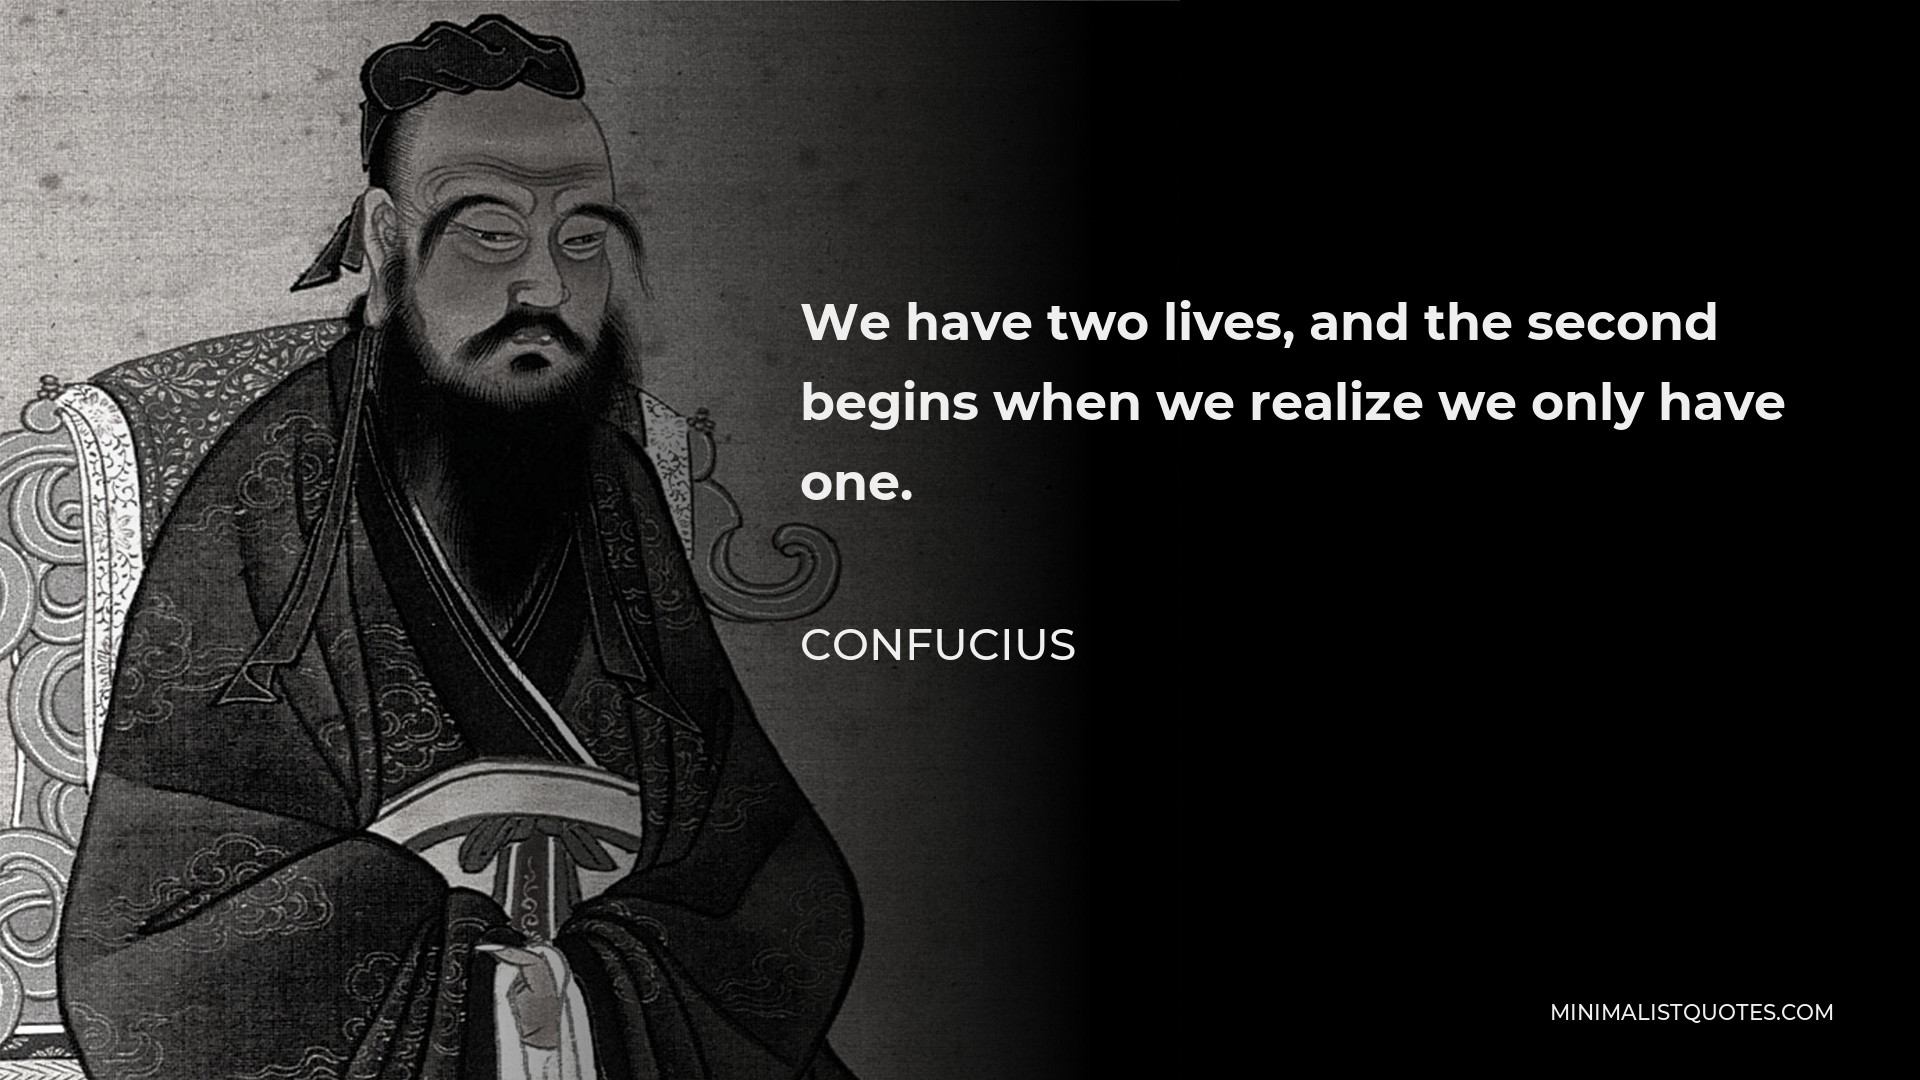 Confucius Quote - We have two lives, and the second begins when we realize we only have one.